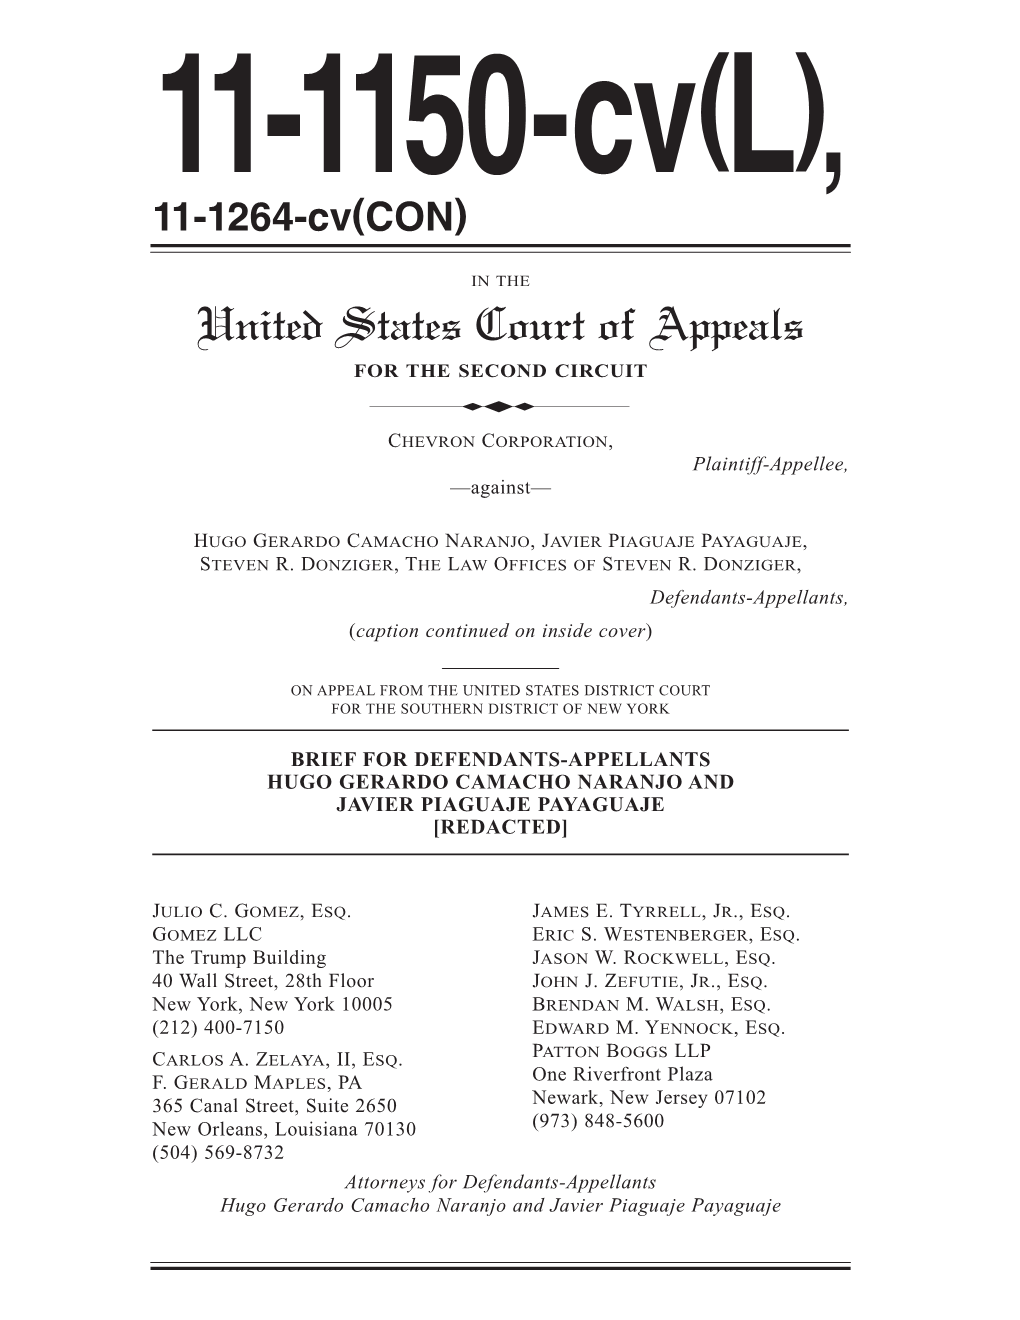 United States Court of Appeals for the SECOND CIRCUIT